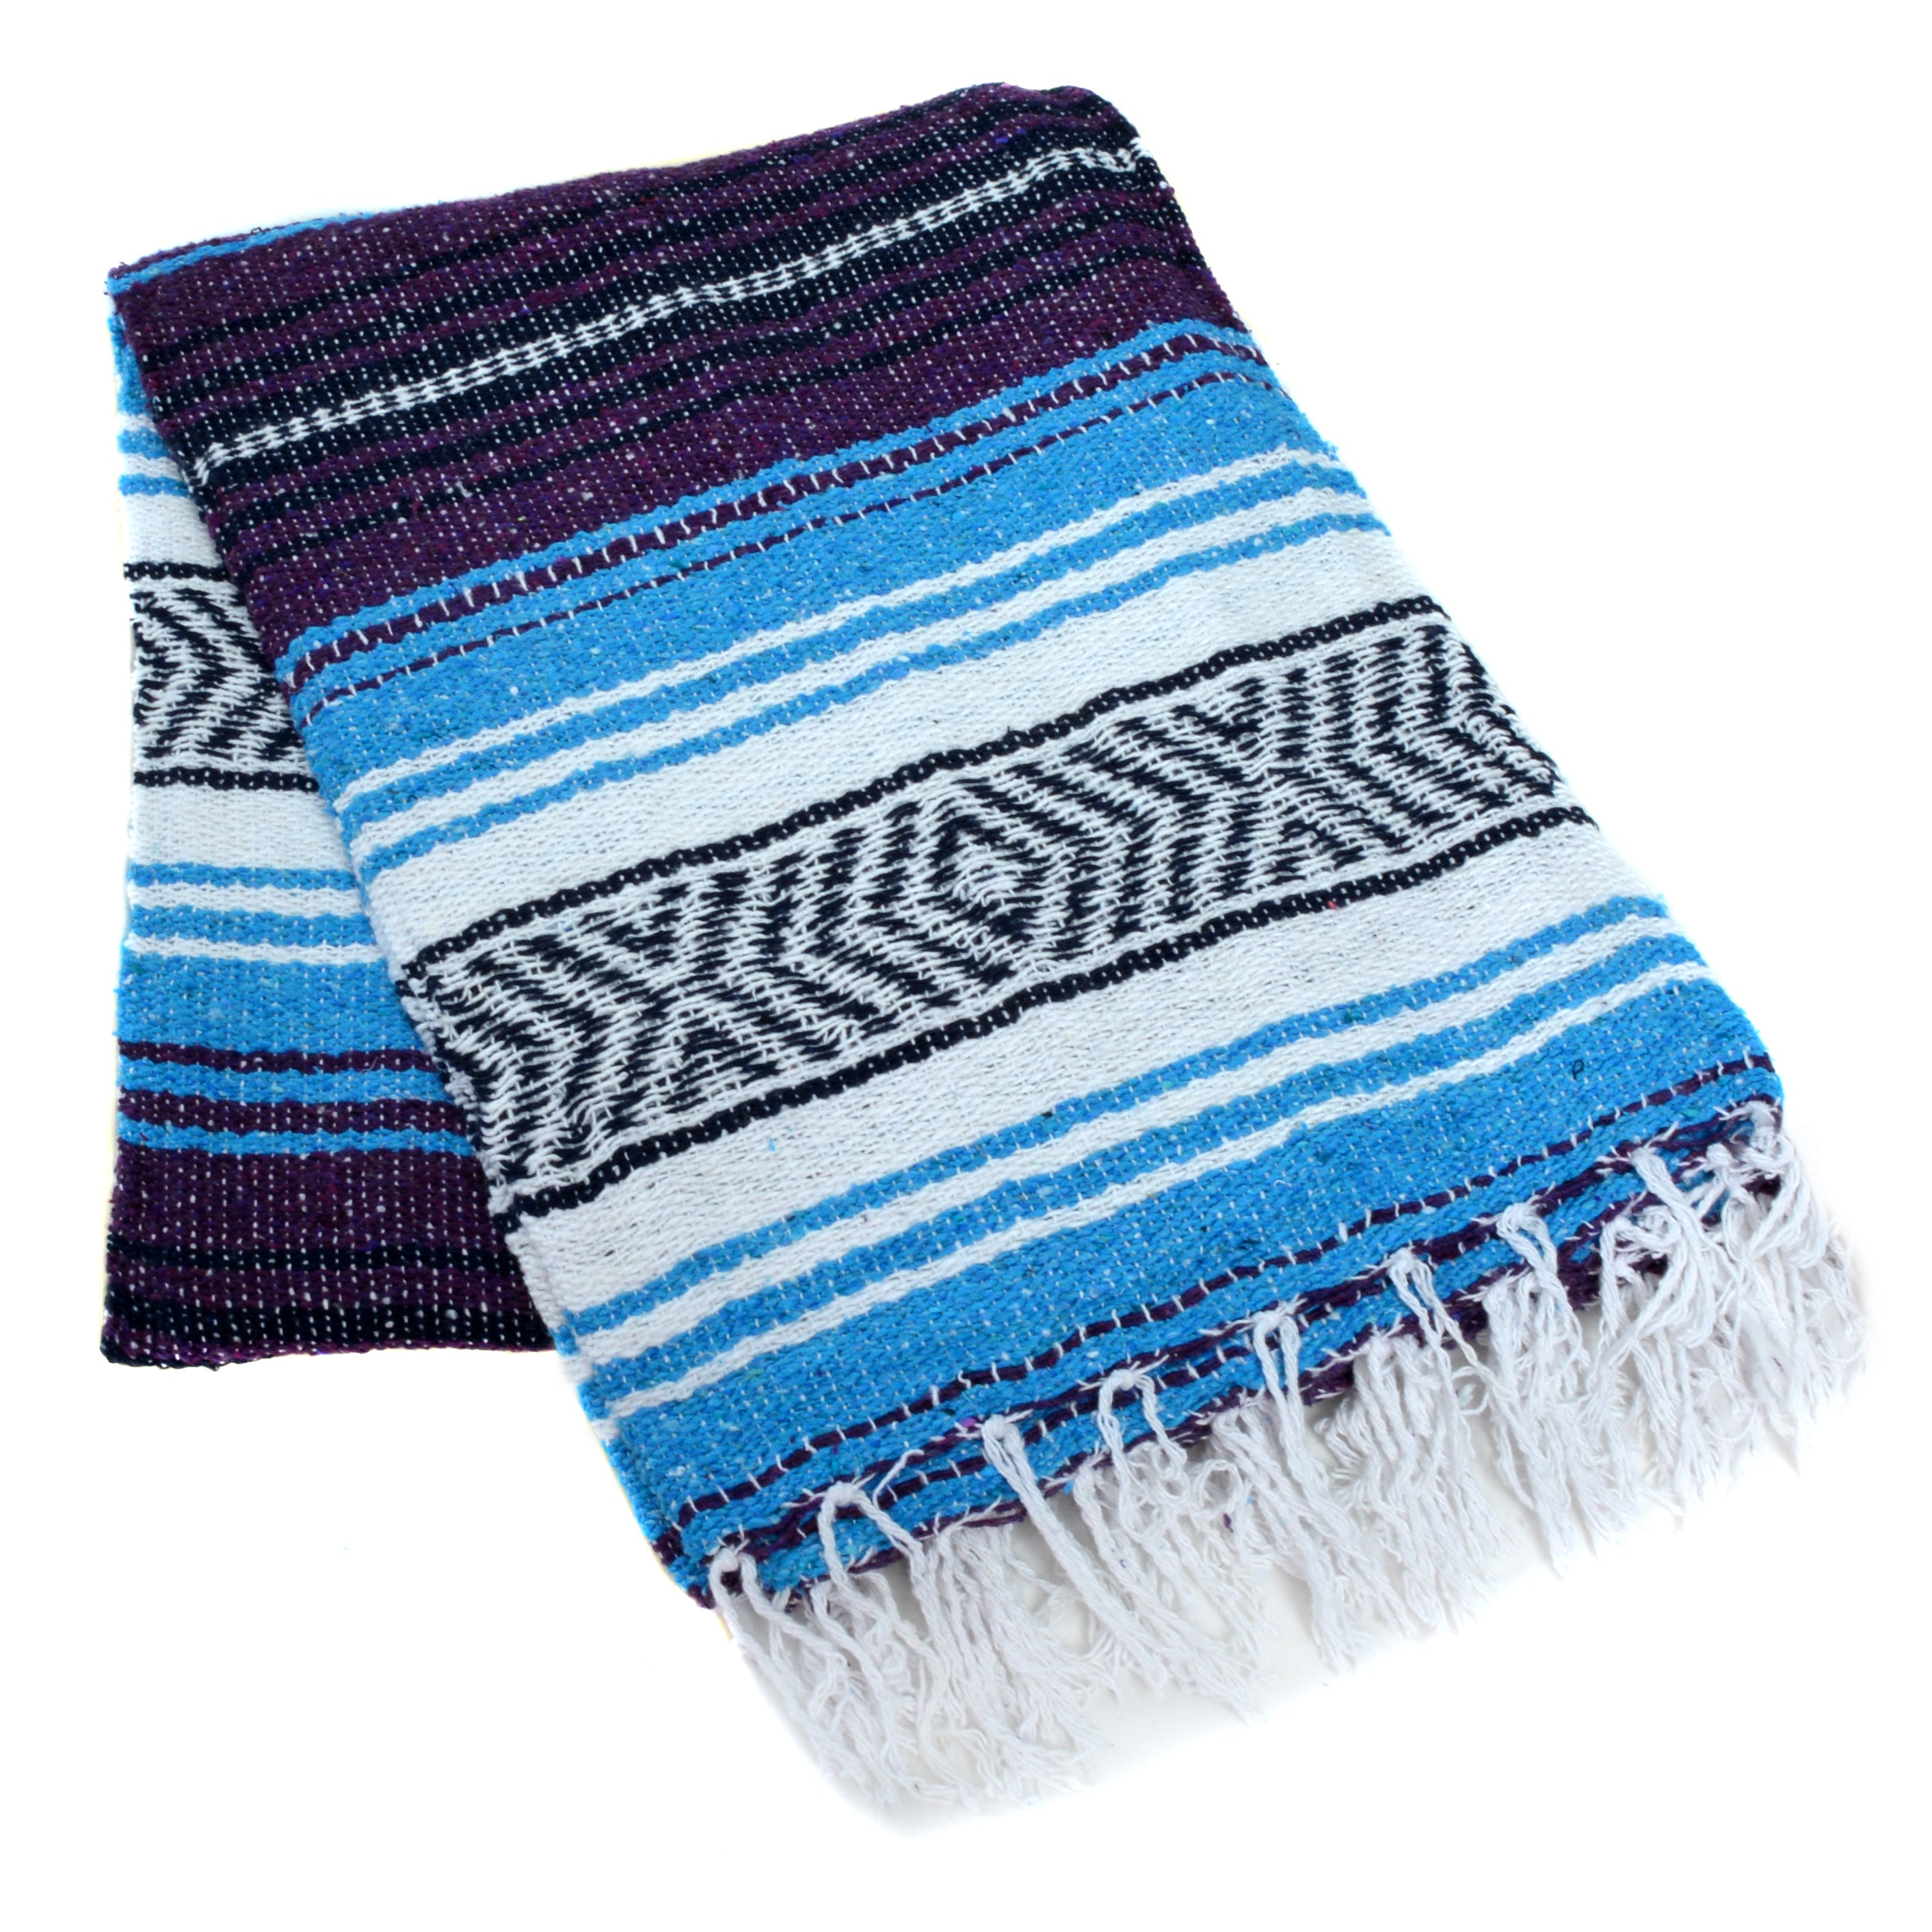 Classic Mexican Yoga Blankets